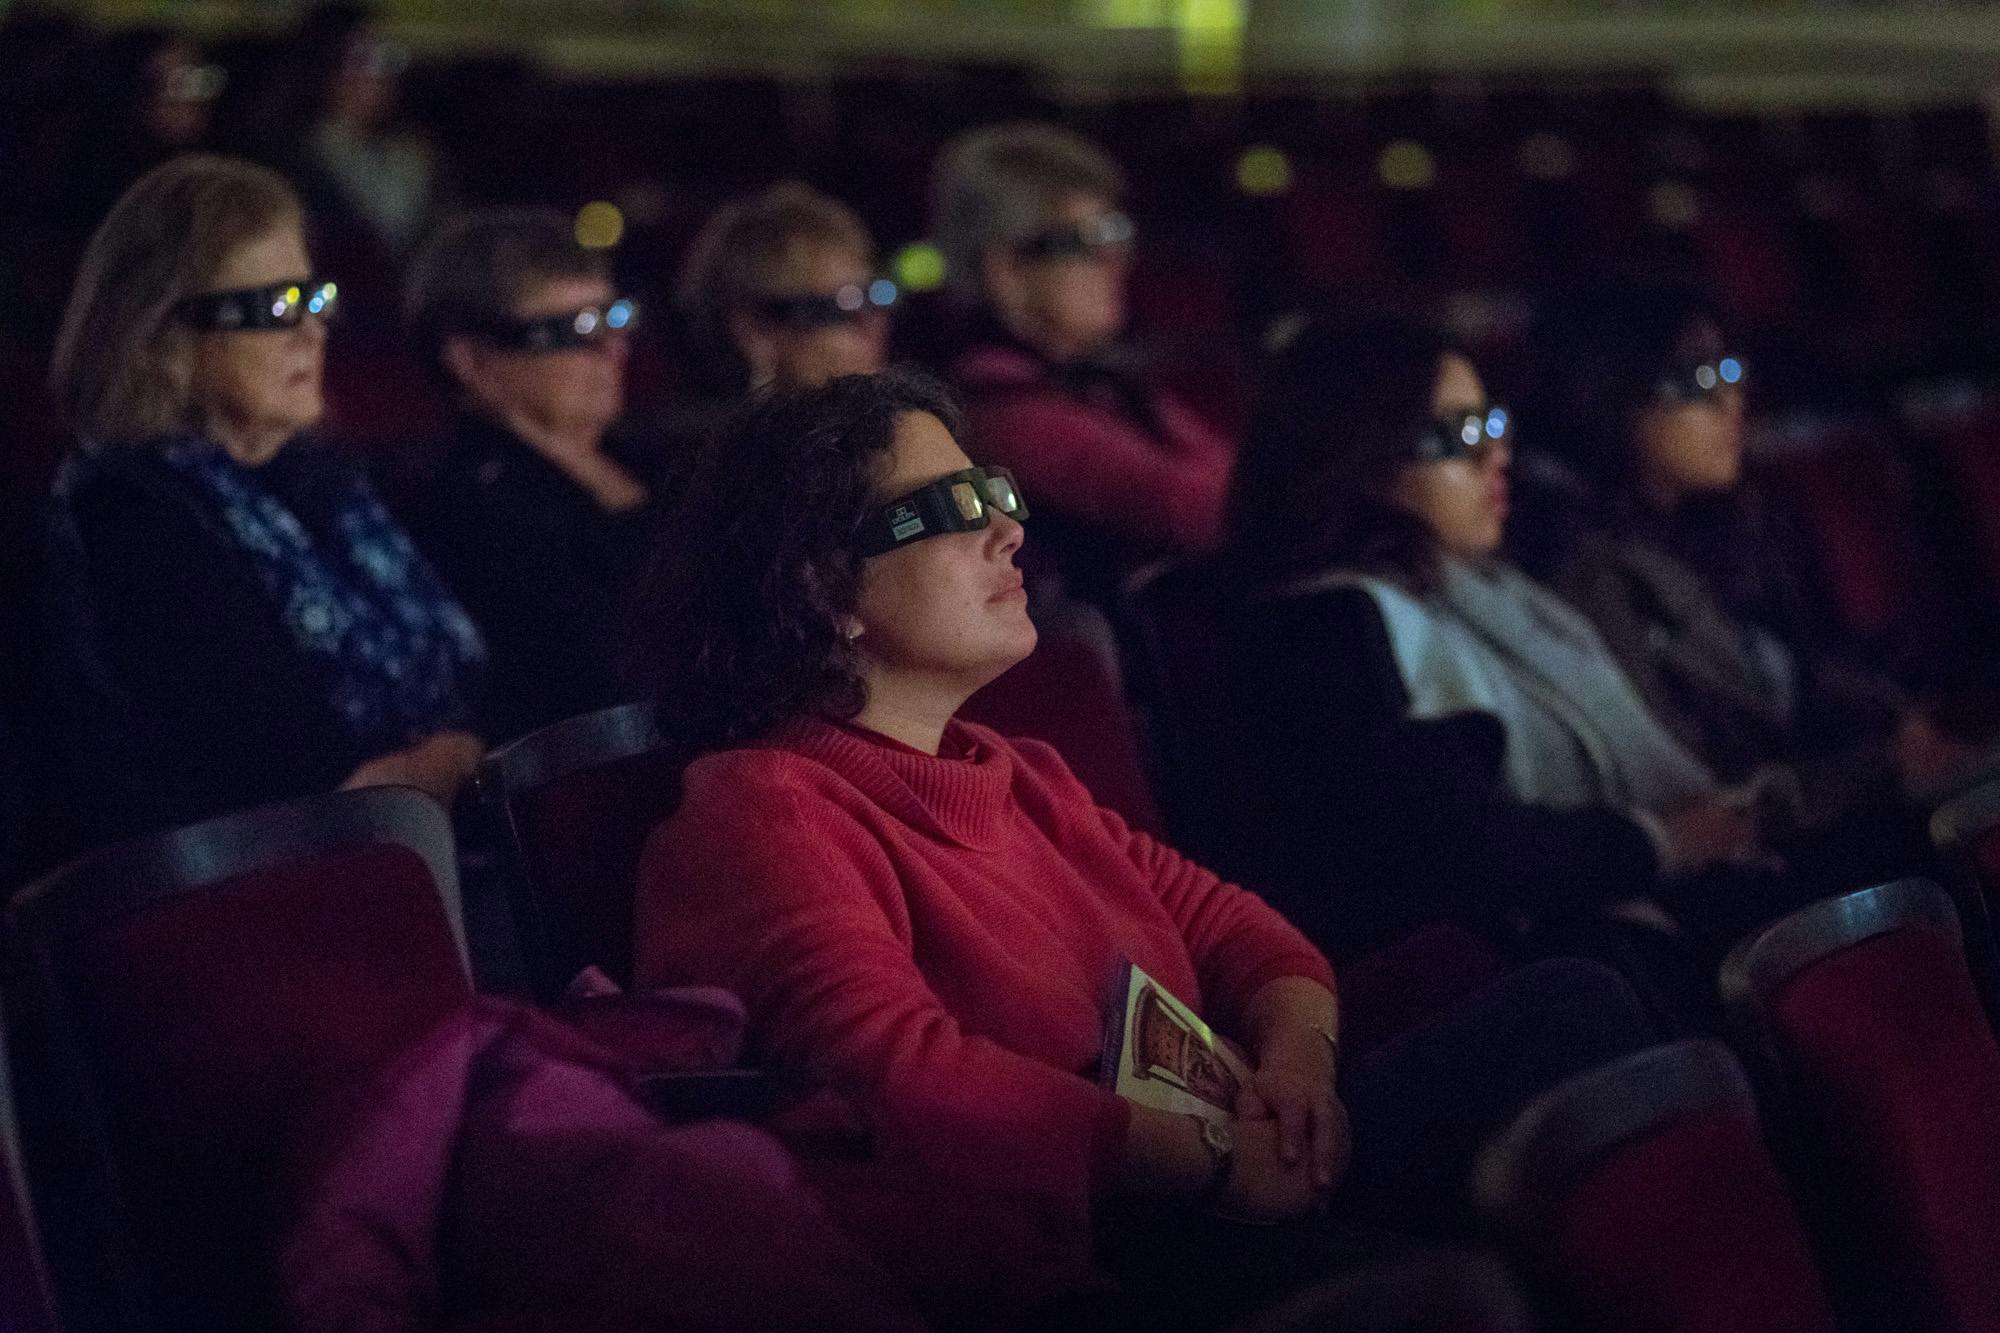 Visitors wearing 3D glasses, looking towards a movie screen that is not visible in the frame.